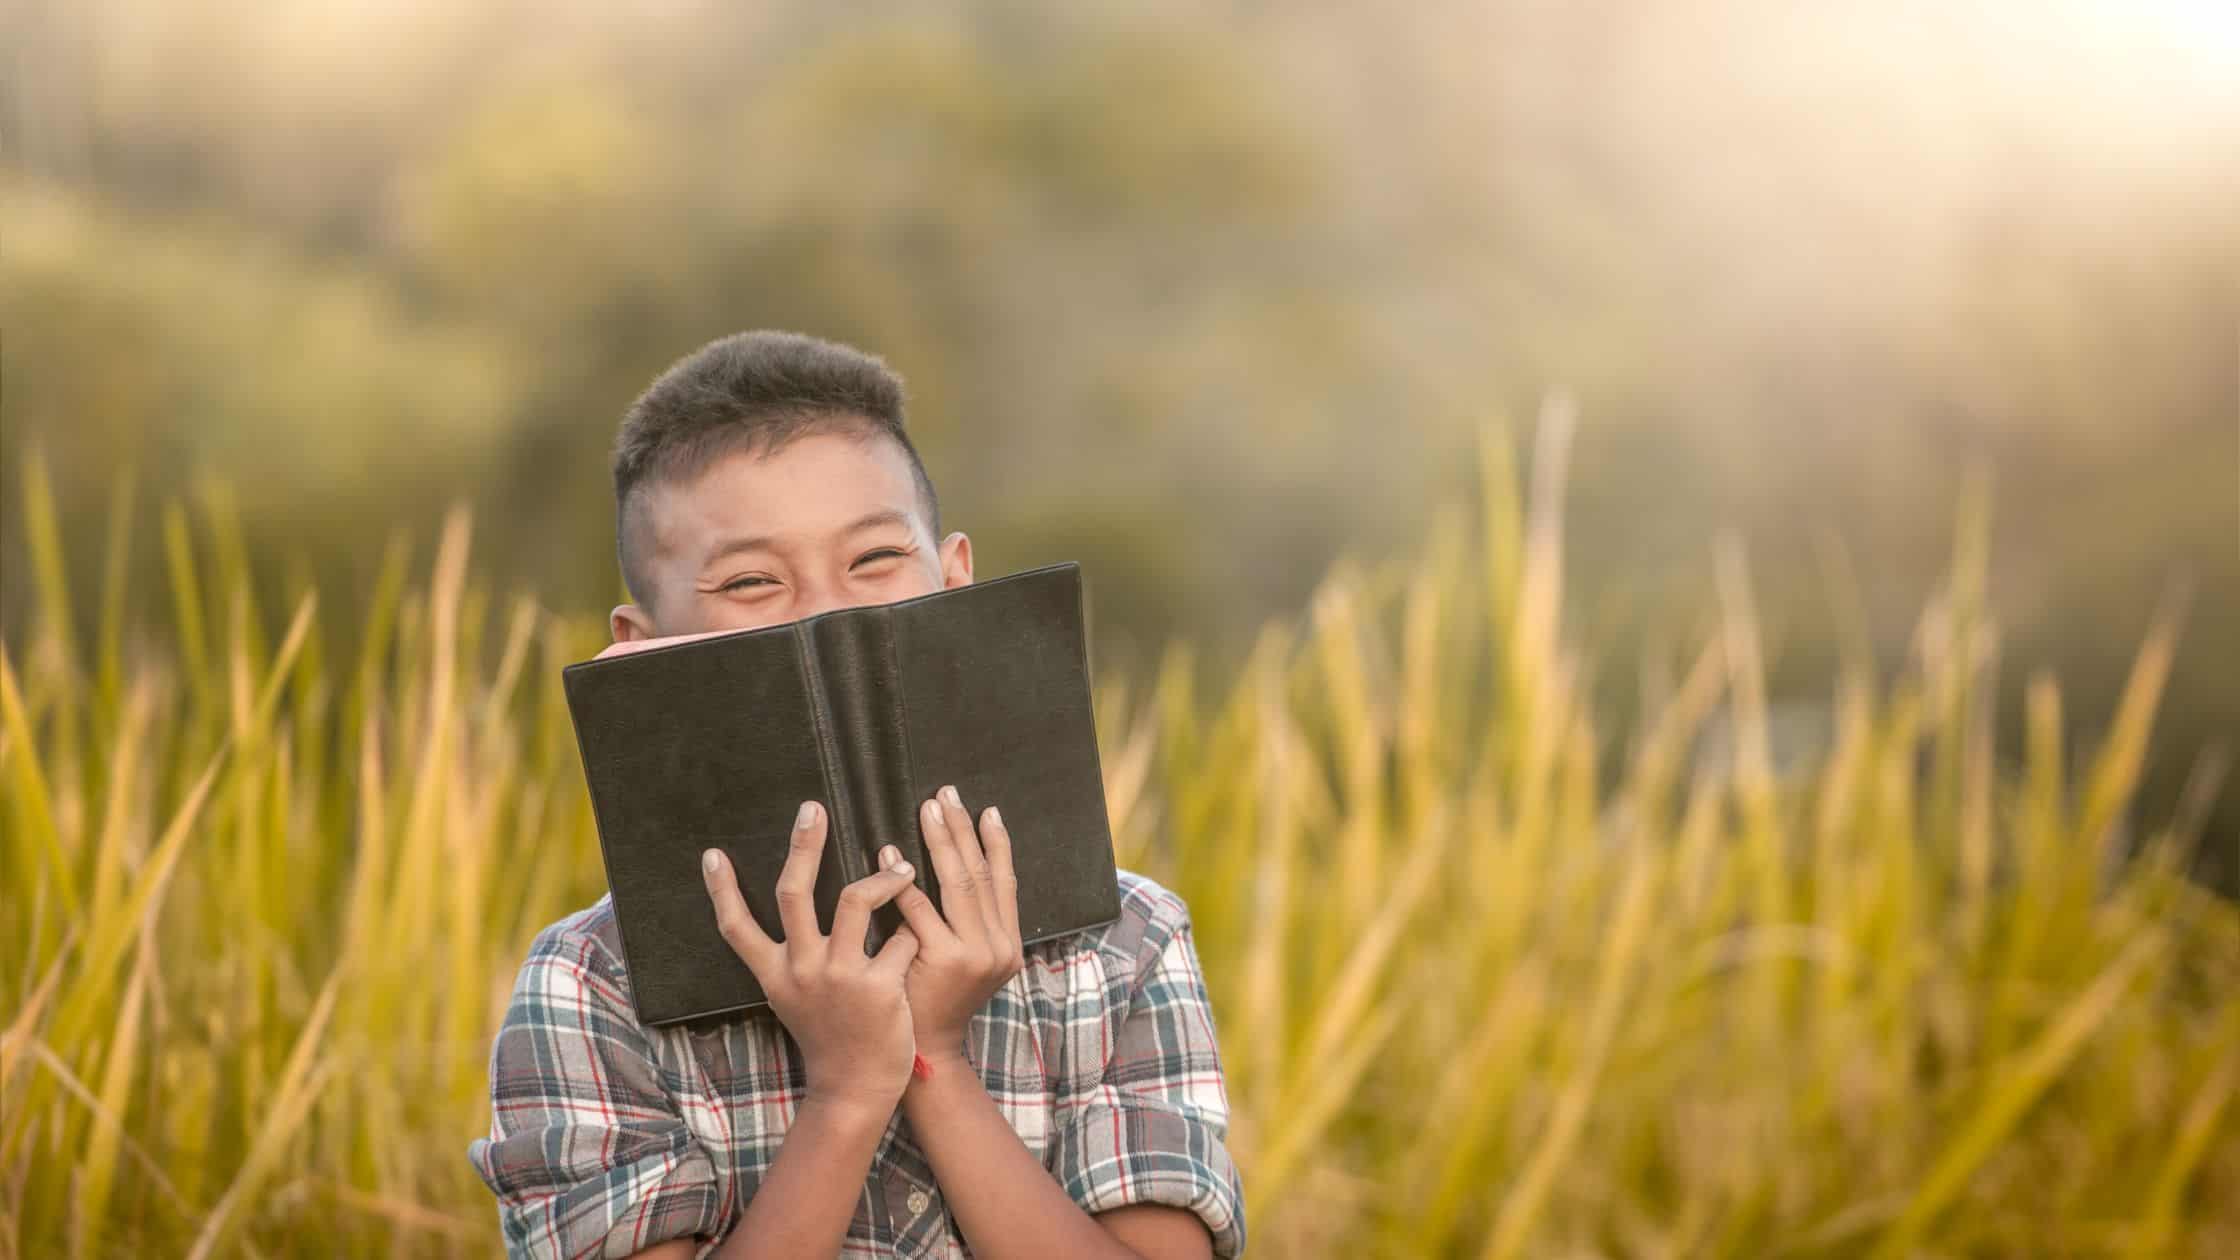 35 Powerful Bible Verses for My Son to Guide His Faith